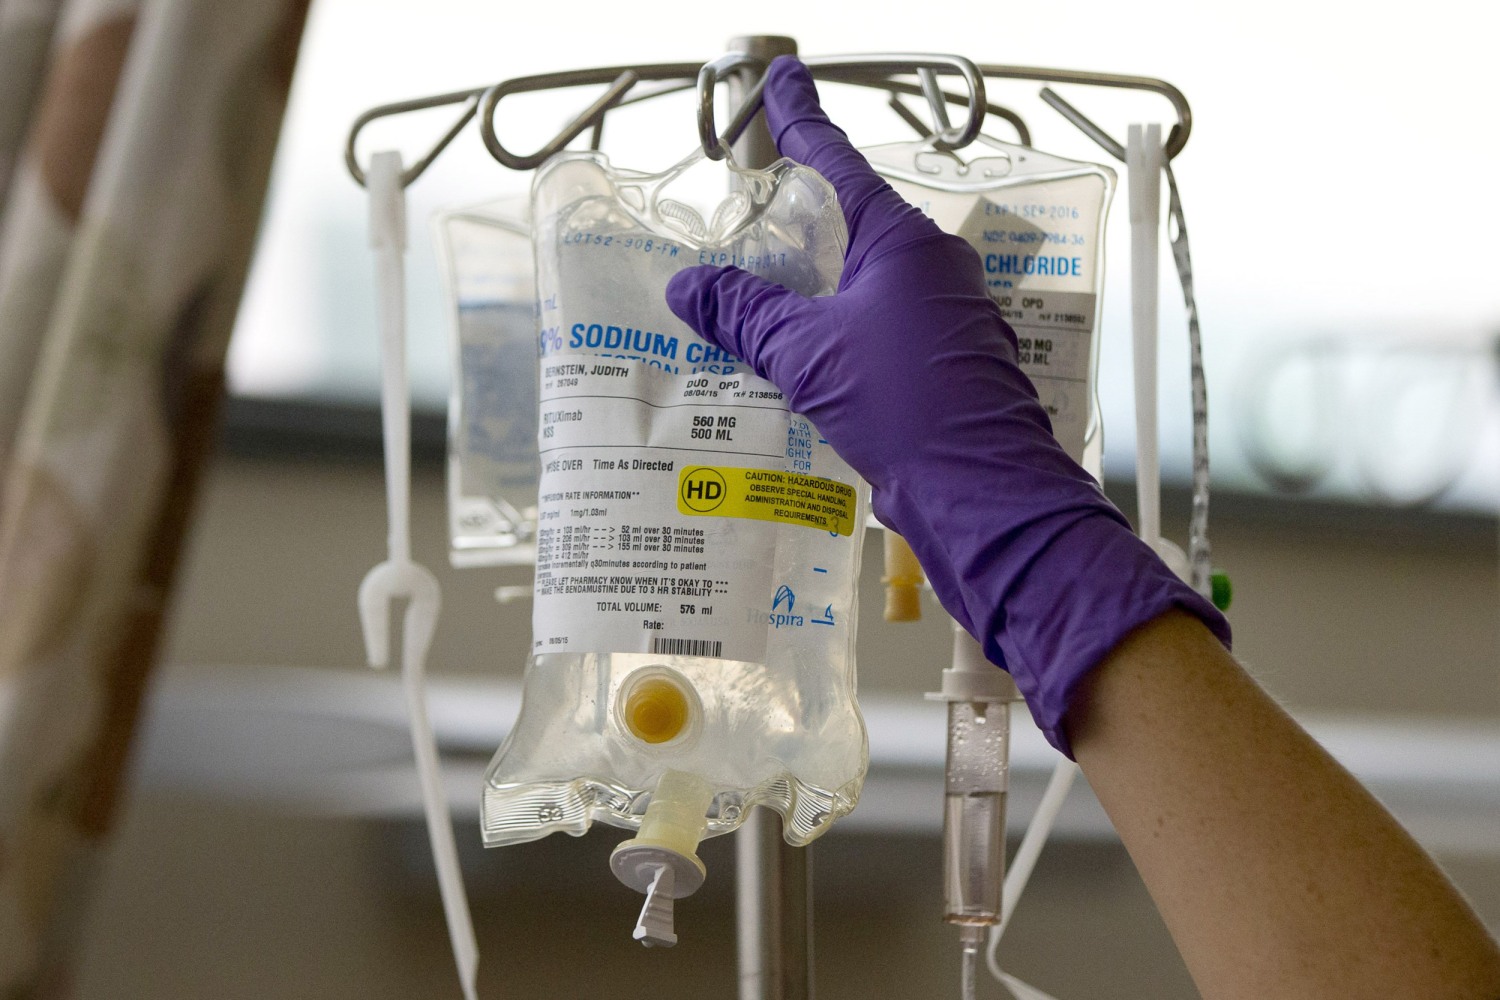 Can chemotherapy for terminal cancer patients do more harm than good?